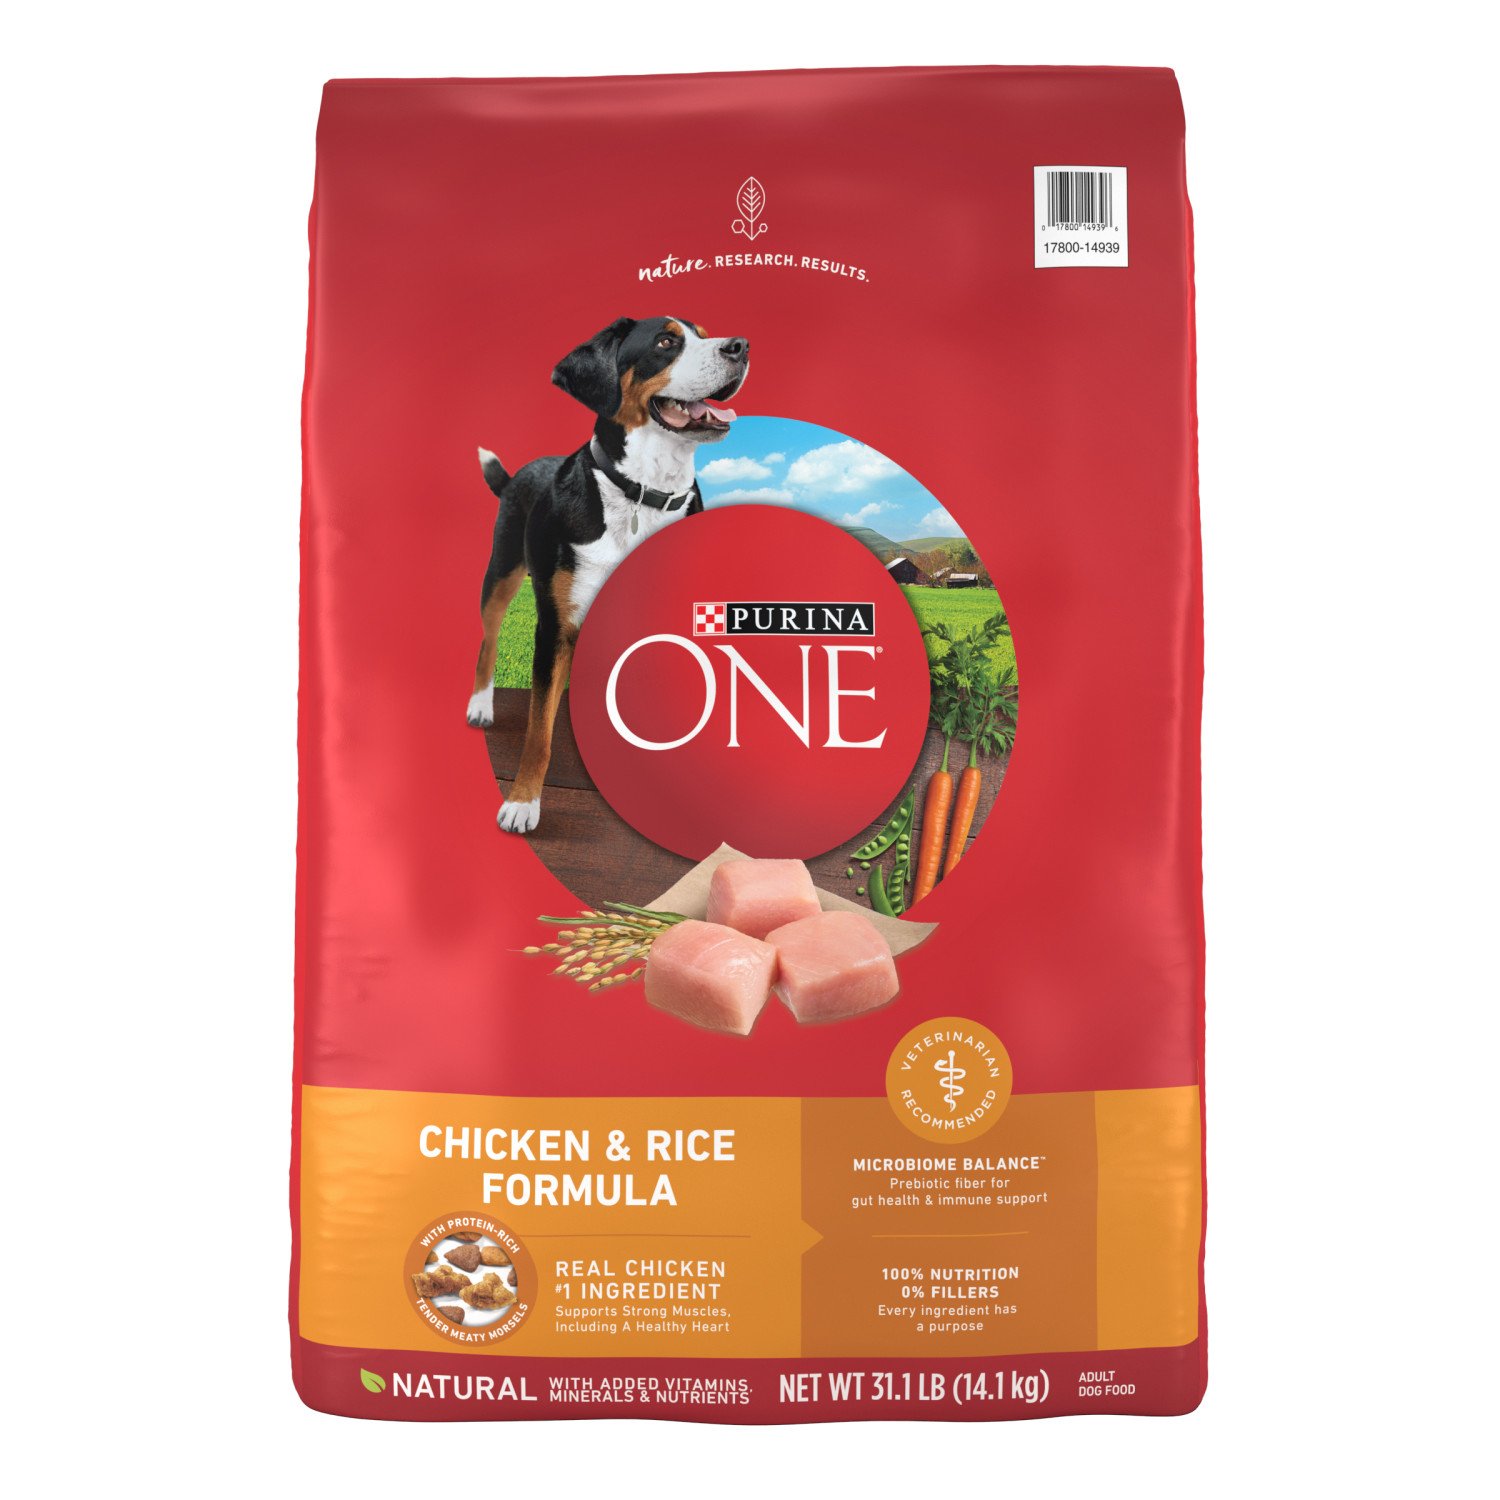 purina one smartblend ingredients